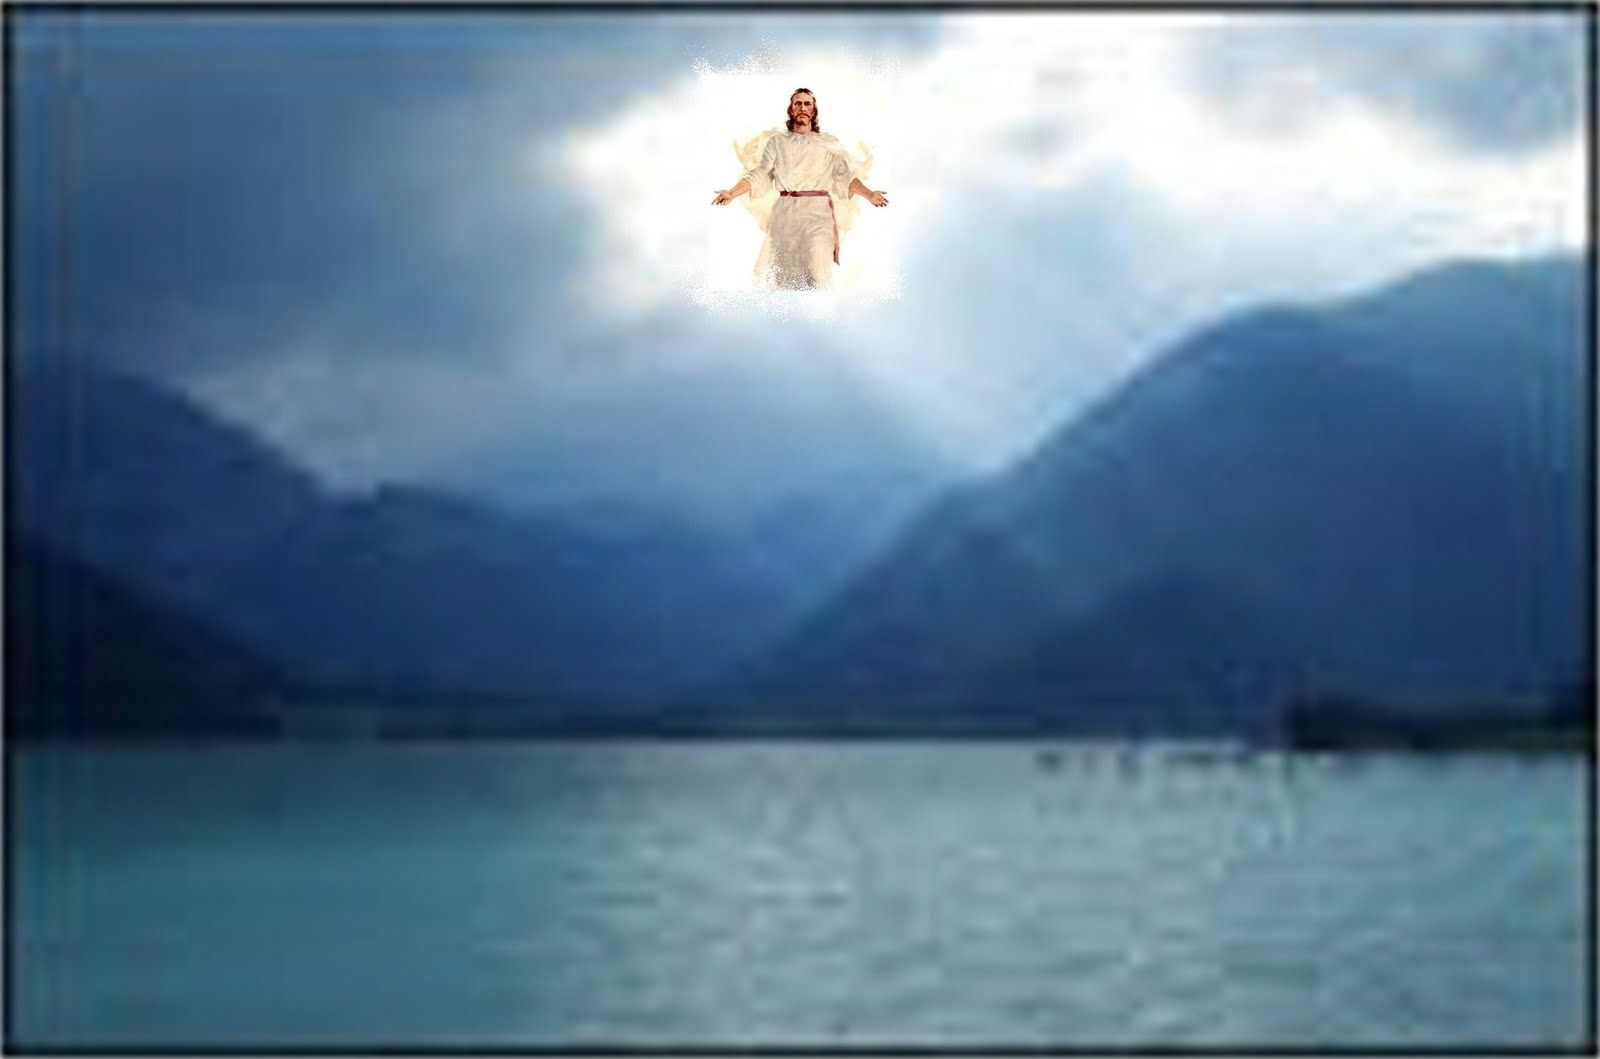 second coming of christ wallpaper